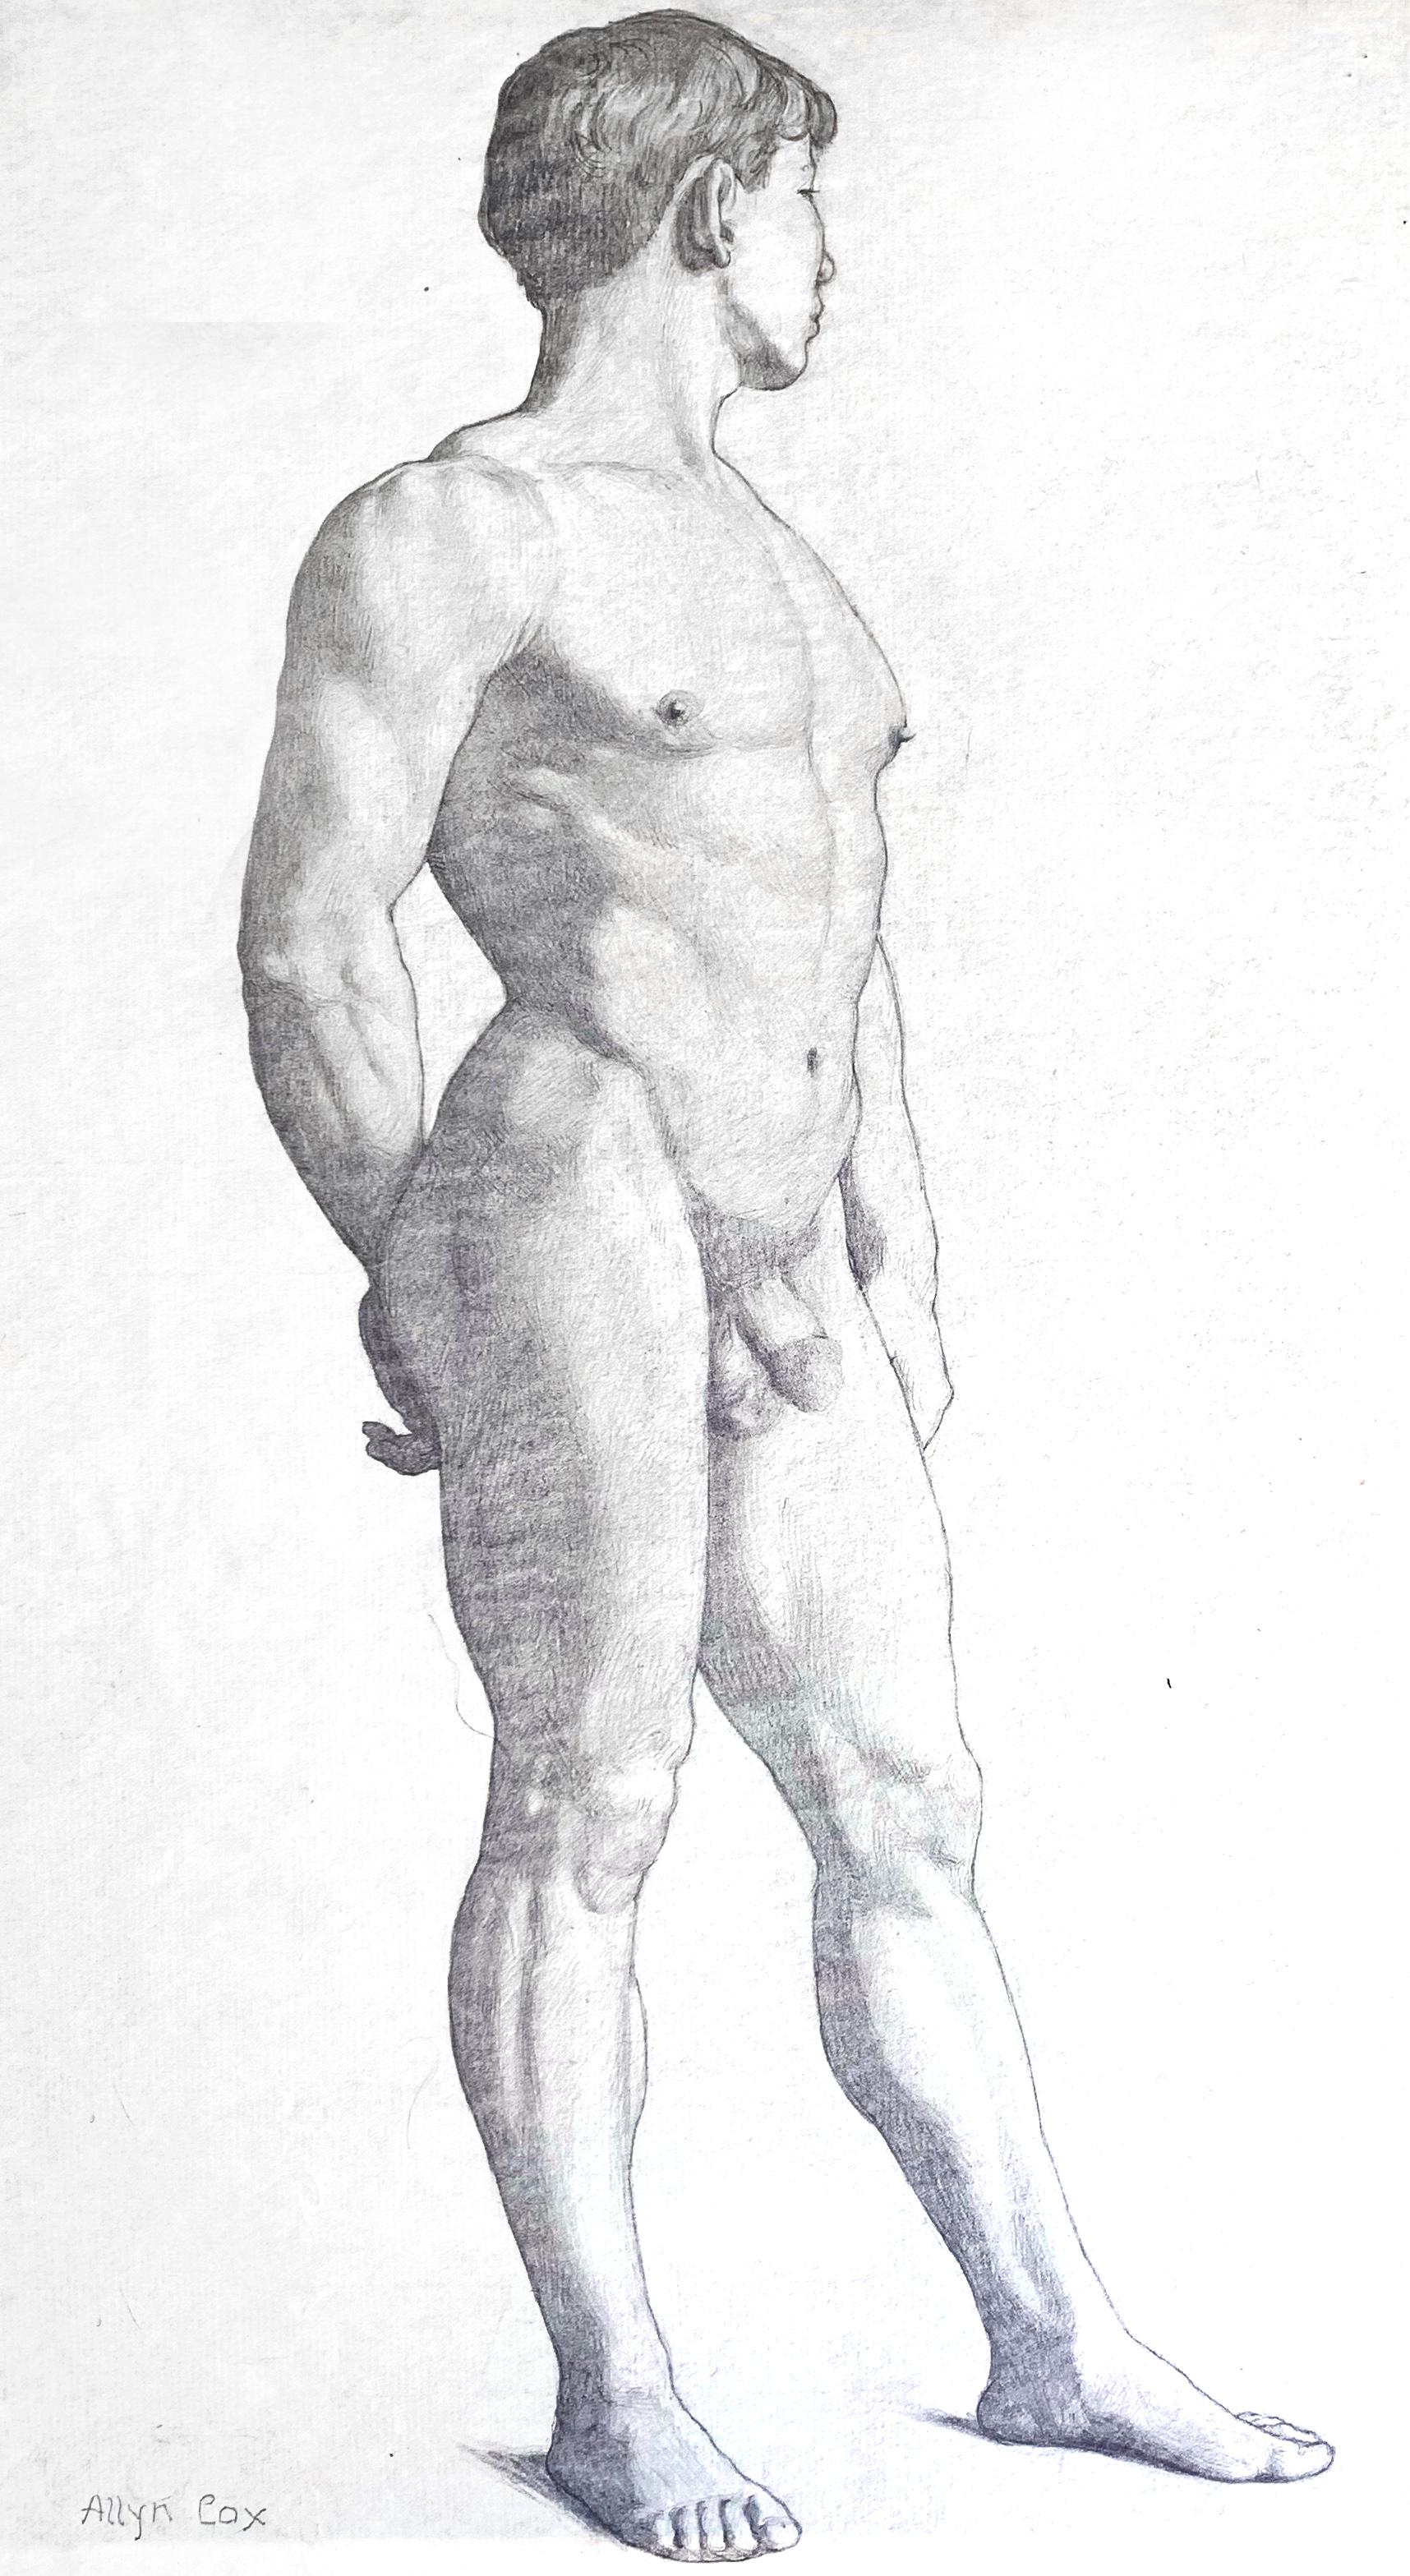 Beautifully and sensitively drawn, this depiction of a standing male nude, three-quarters view, was created by Allyn Cox, son of the famous muralist Kenyon Cox. The younger Allyn was important in his own right for executing an ambitious set of